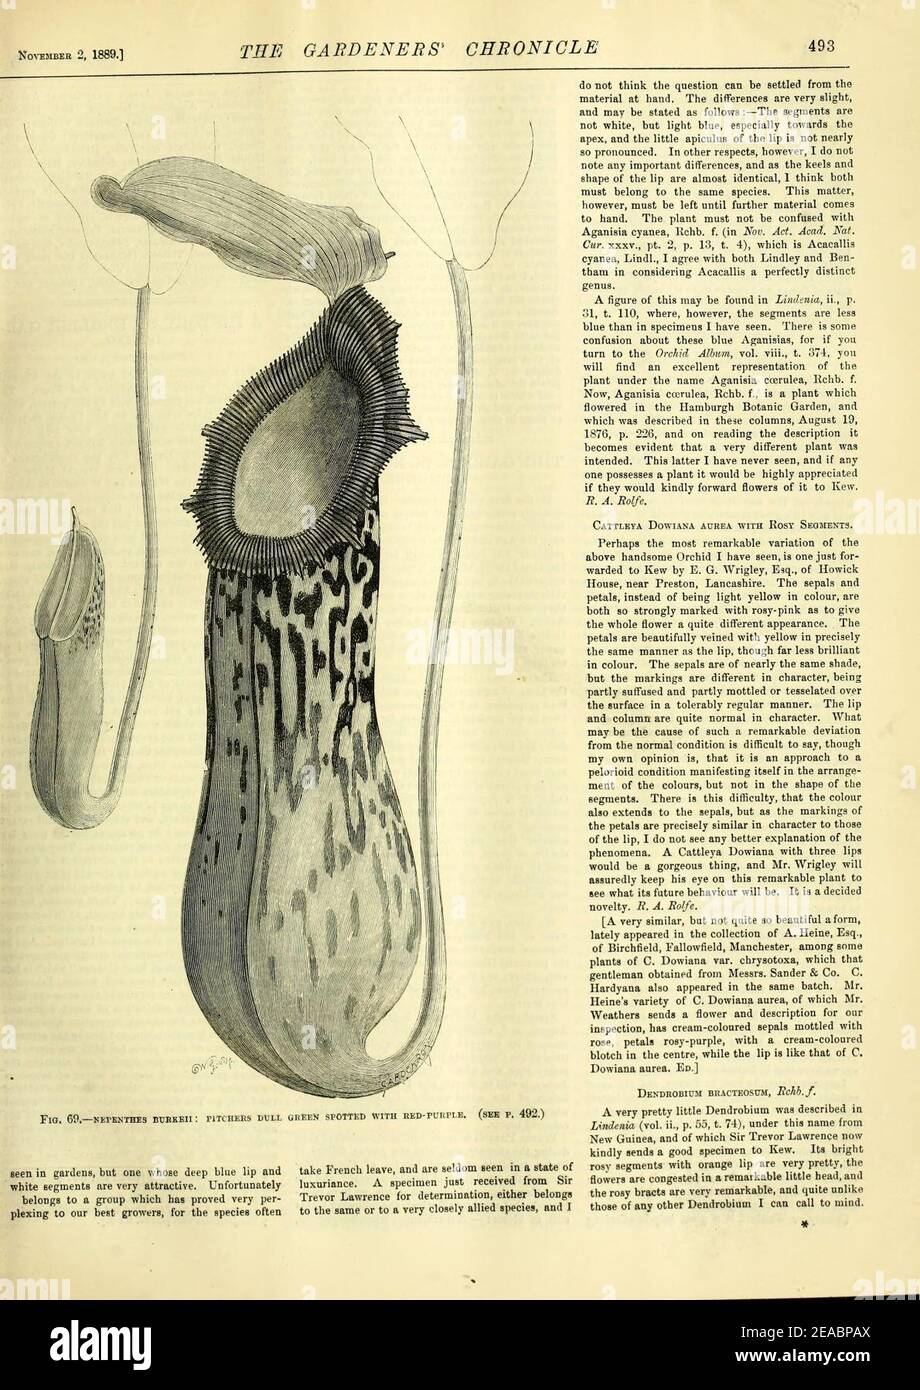 Nepenthes burkei - The Gardeners' Chronicle (1889). Stock Photo